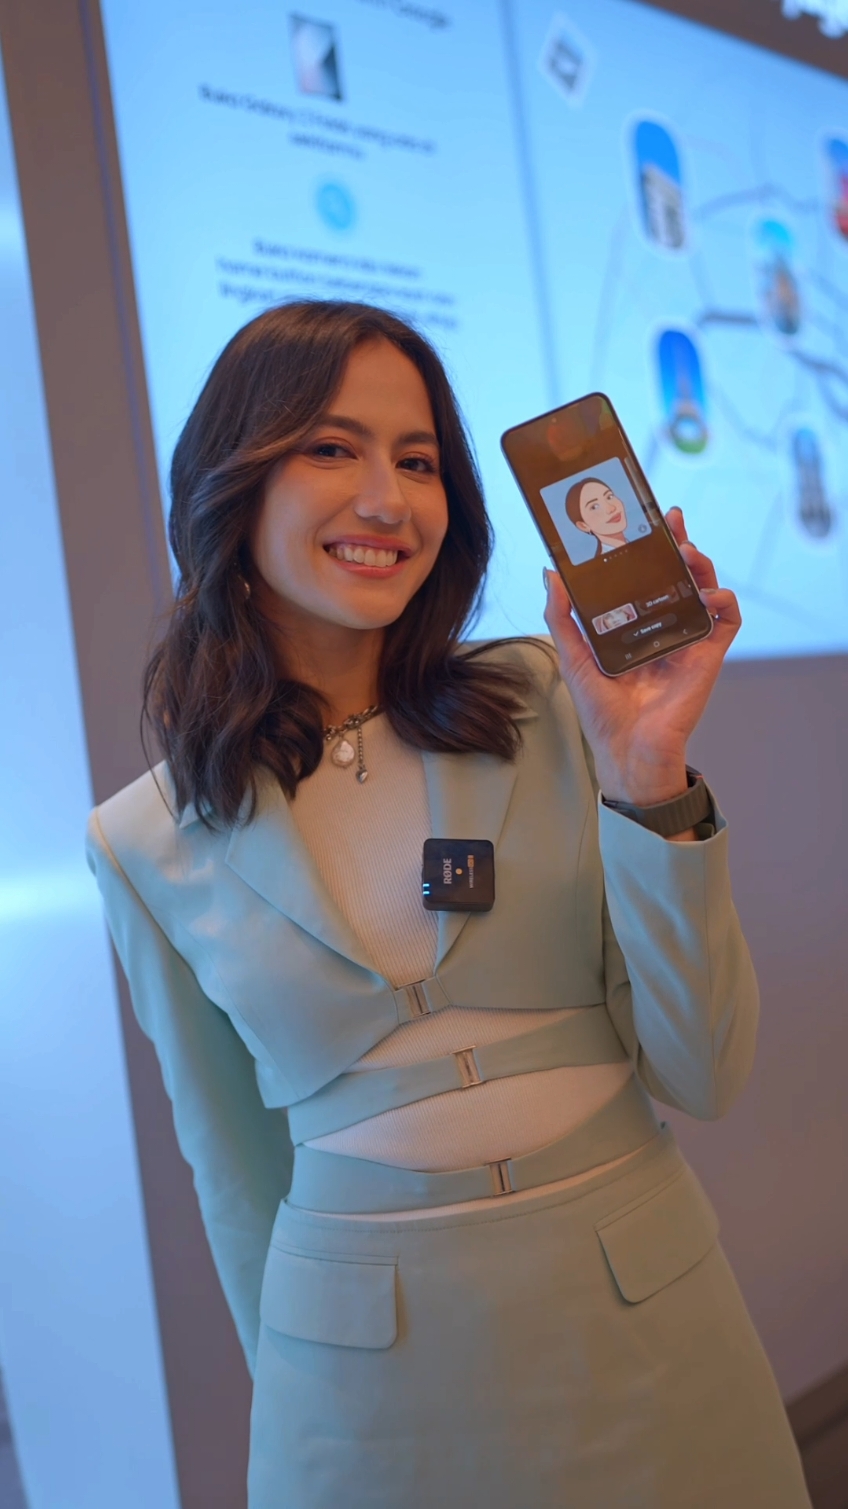 Check out #TeamGalaxy showing off their #GalaxyZFold6 and #GalaxyZFlip6 during the Unfold Your Story with #GalaxyAI event! @Yura Yunita with Sketch to Image AI Drawing 🎨 @pevpearce6 with Portrait Studio 🖼️ @therealdisastr with Interpreter on Dual Screen 🗣️ @anyageraldineee with her FlexWindow 😍 @dariusdonna with Circle to Search ⭕ @vidi.aldiano and his Auto Zoom with FlexCam 🤳🏻 Get yours to experience the luxury just like them by pre-ordering at the link in bio with total benefit up to Rp7.4mio + FREE Galaxy Buds FE!